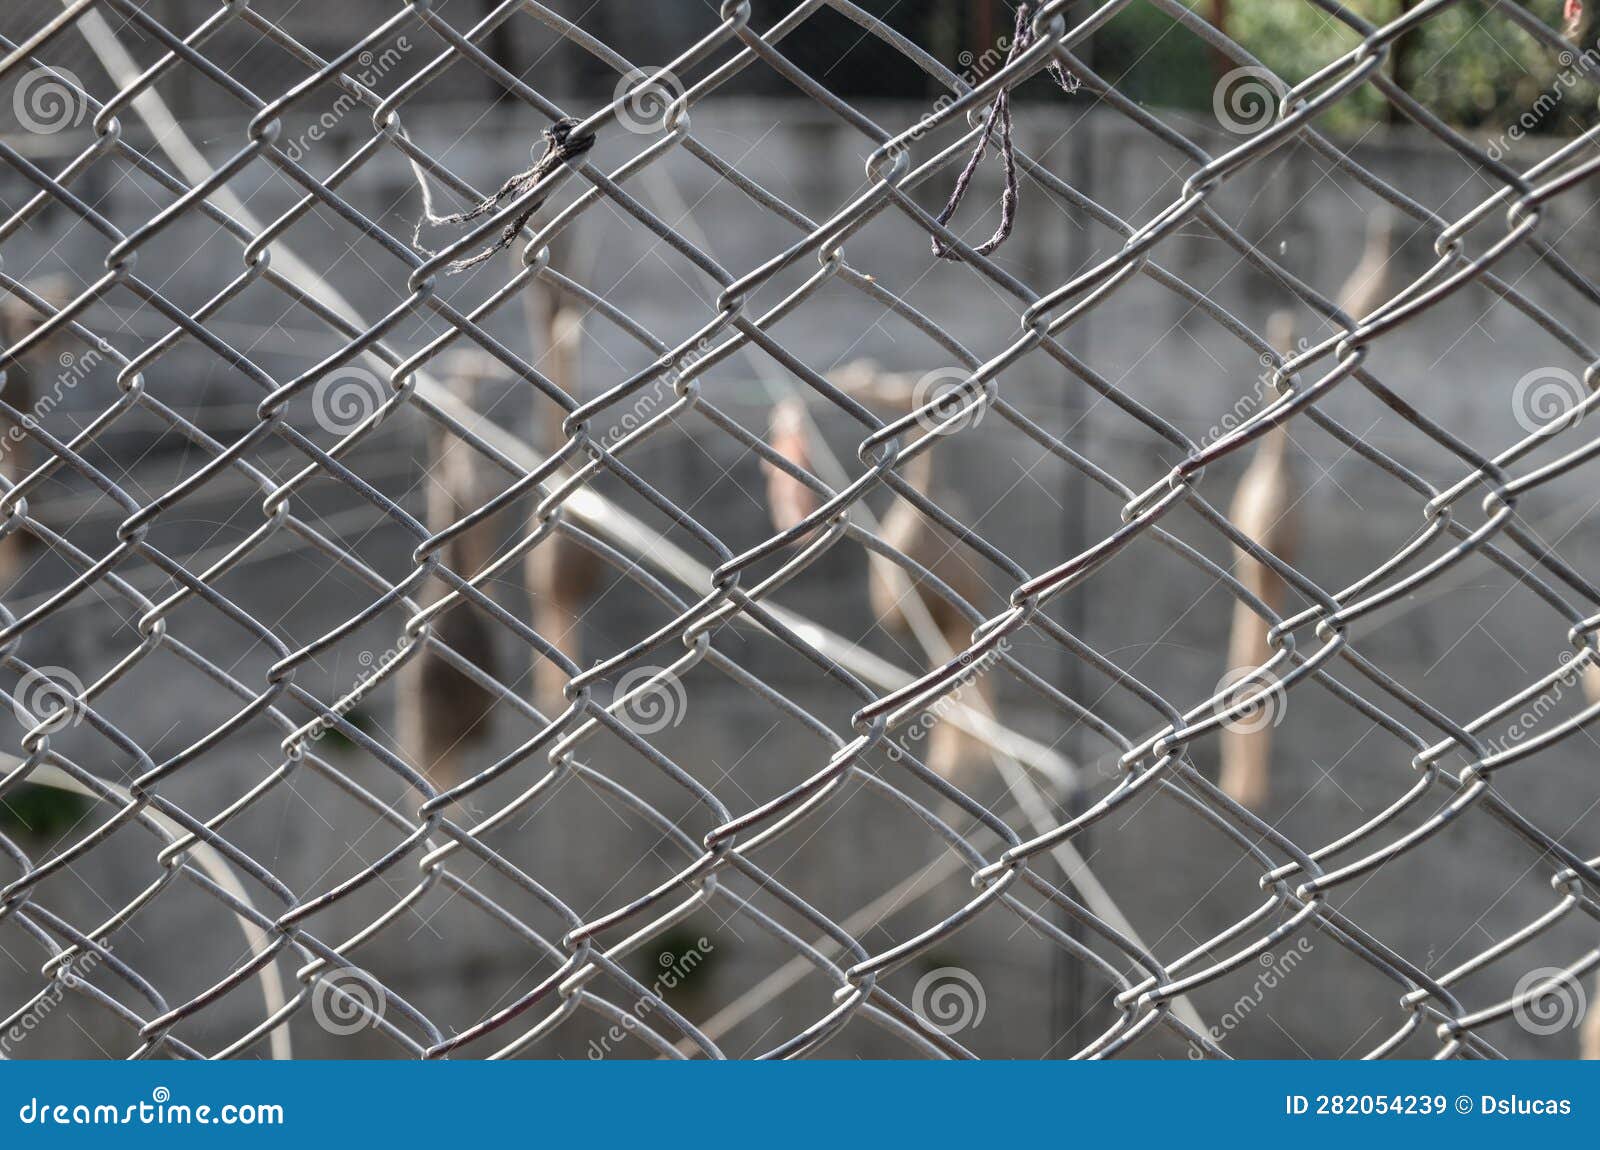 Chain link fencing stock image. Image of grid, industry - 282054239